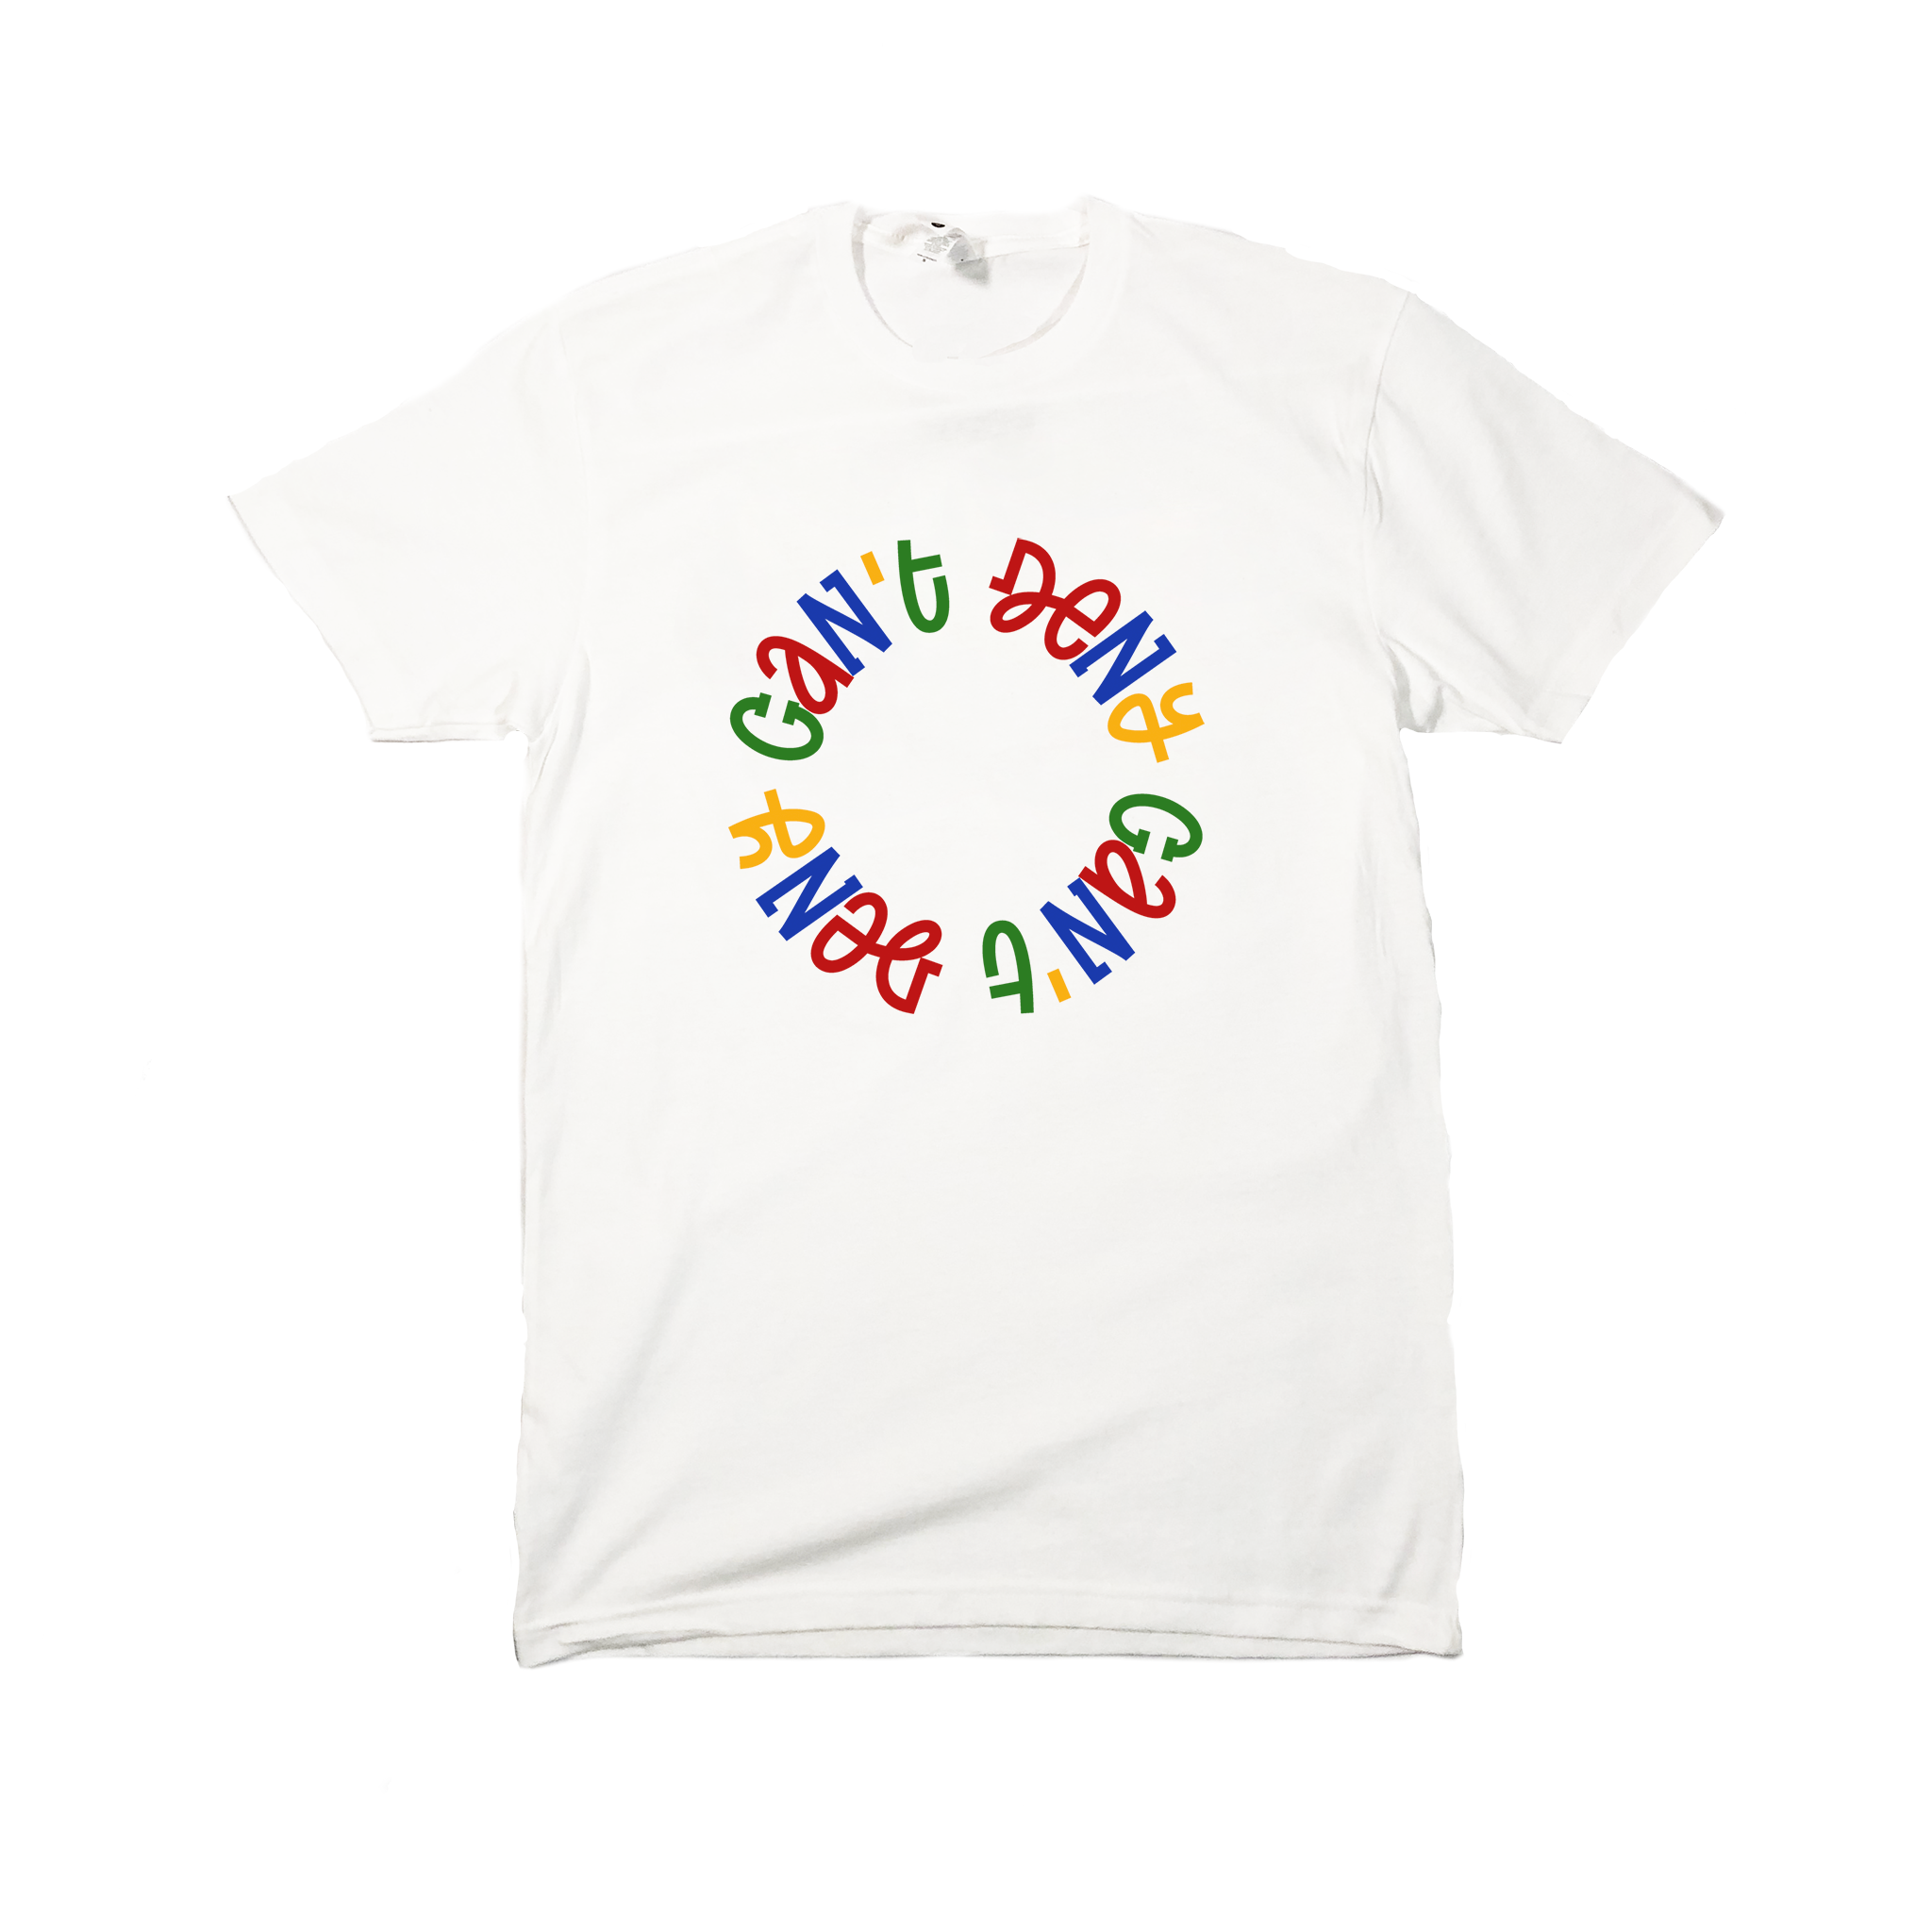 Primary Colors Circle Logo Tee